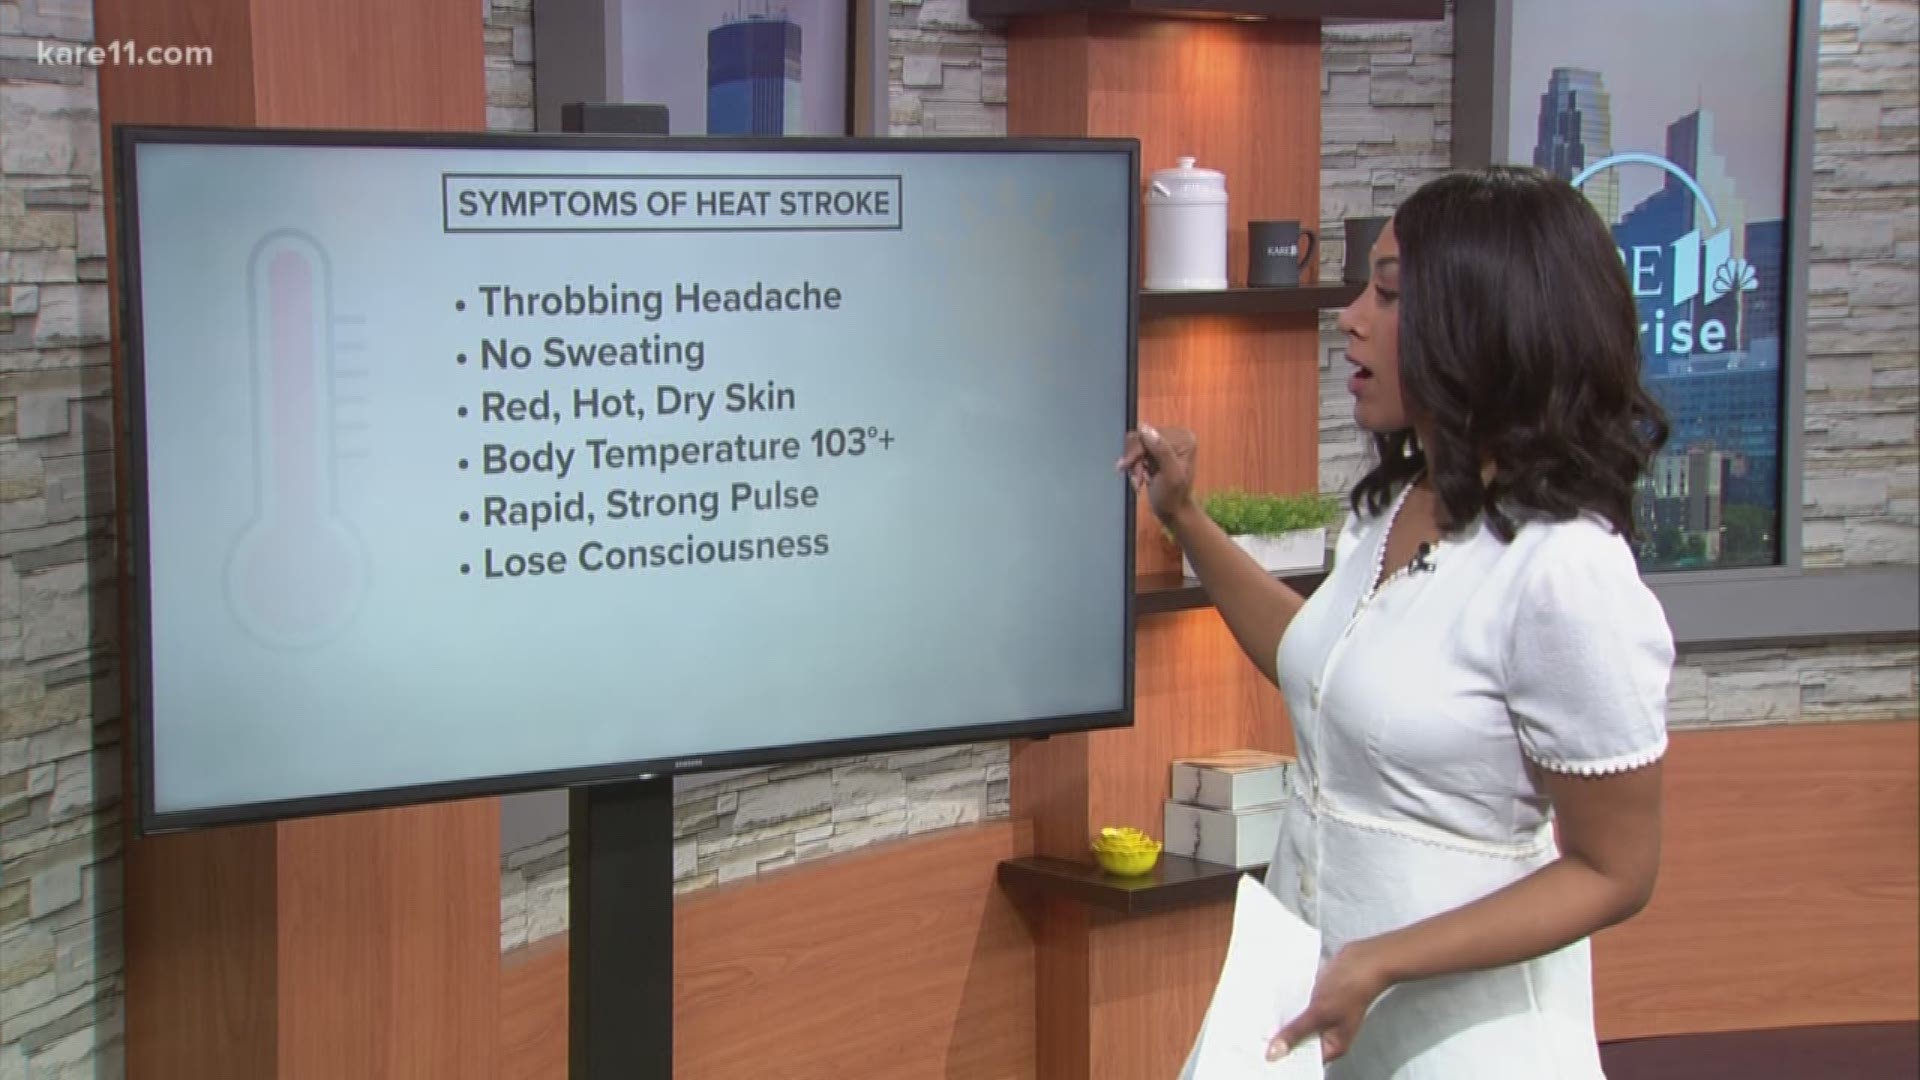 With a potential heat wave on the way, it's important to know the symptoms of a dangerous heat stroke.